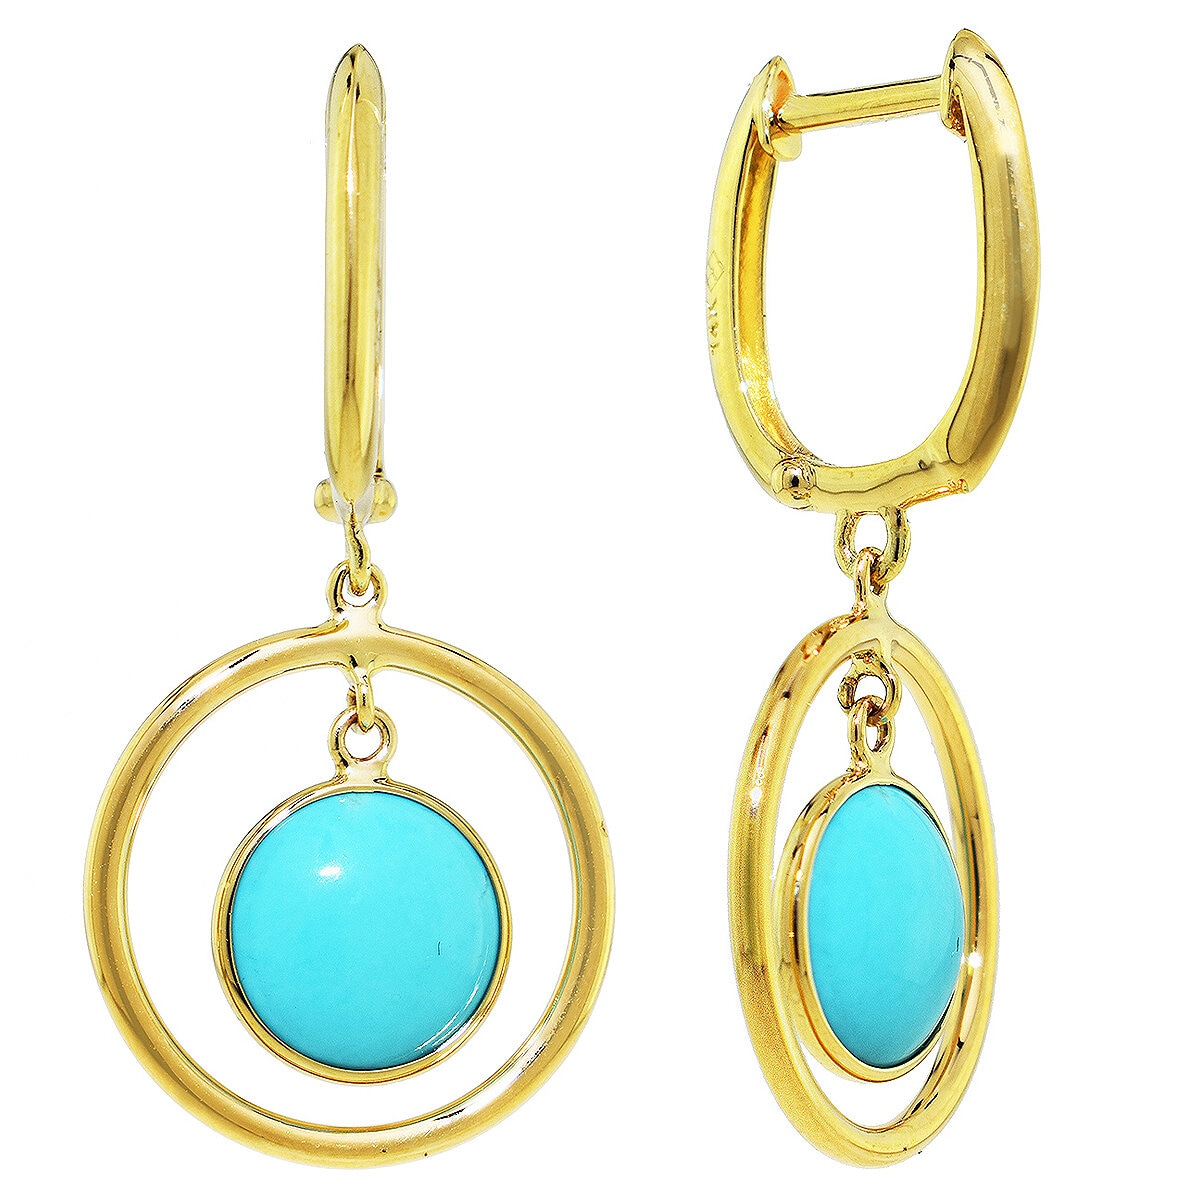 1273355 14KT Yellow Gold Round Turquoise Rondelle Drop Earrings/